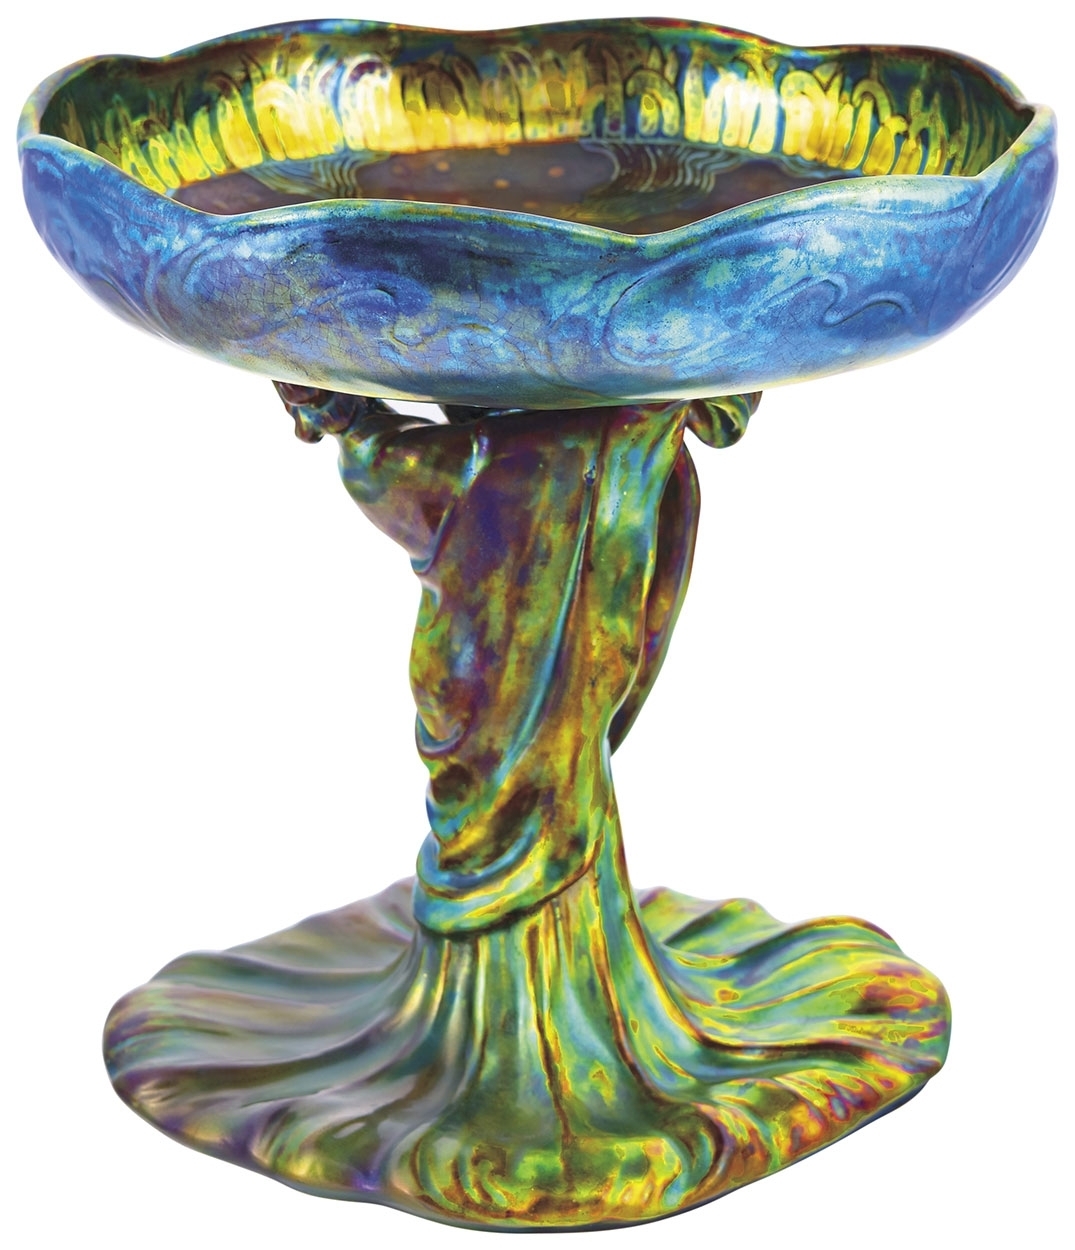 Zsolnay Bowl with a pedestal forming a Female figure, Zsolnay, around 1898